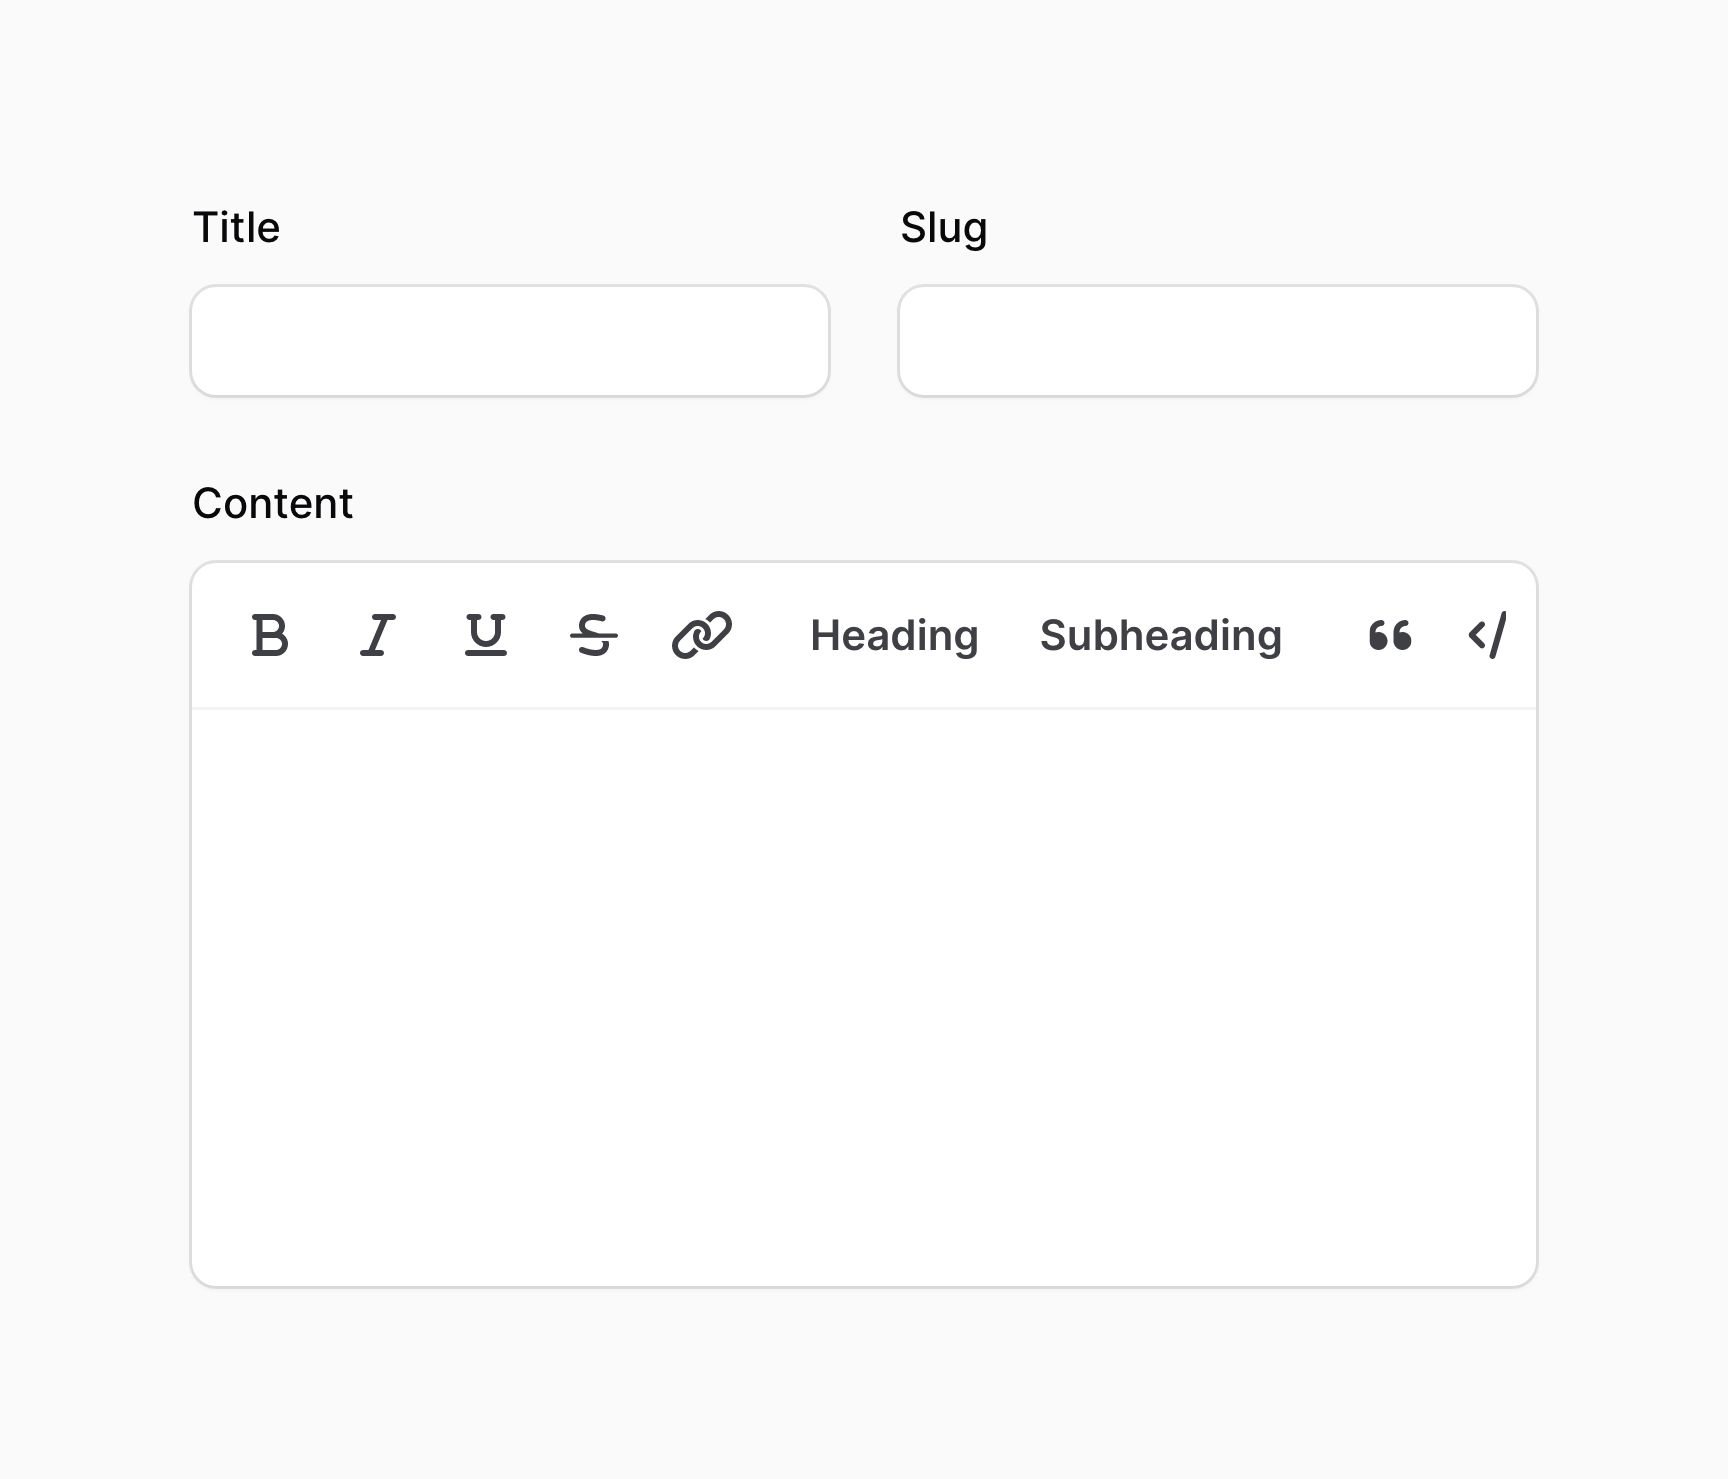 Form fields in 2 columns, but with the rich editor spanning the full width of the form